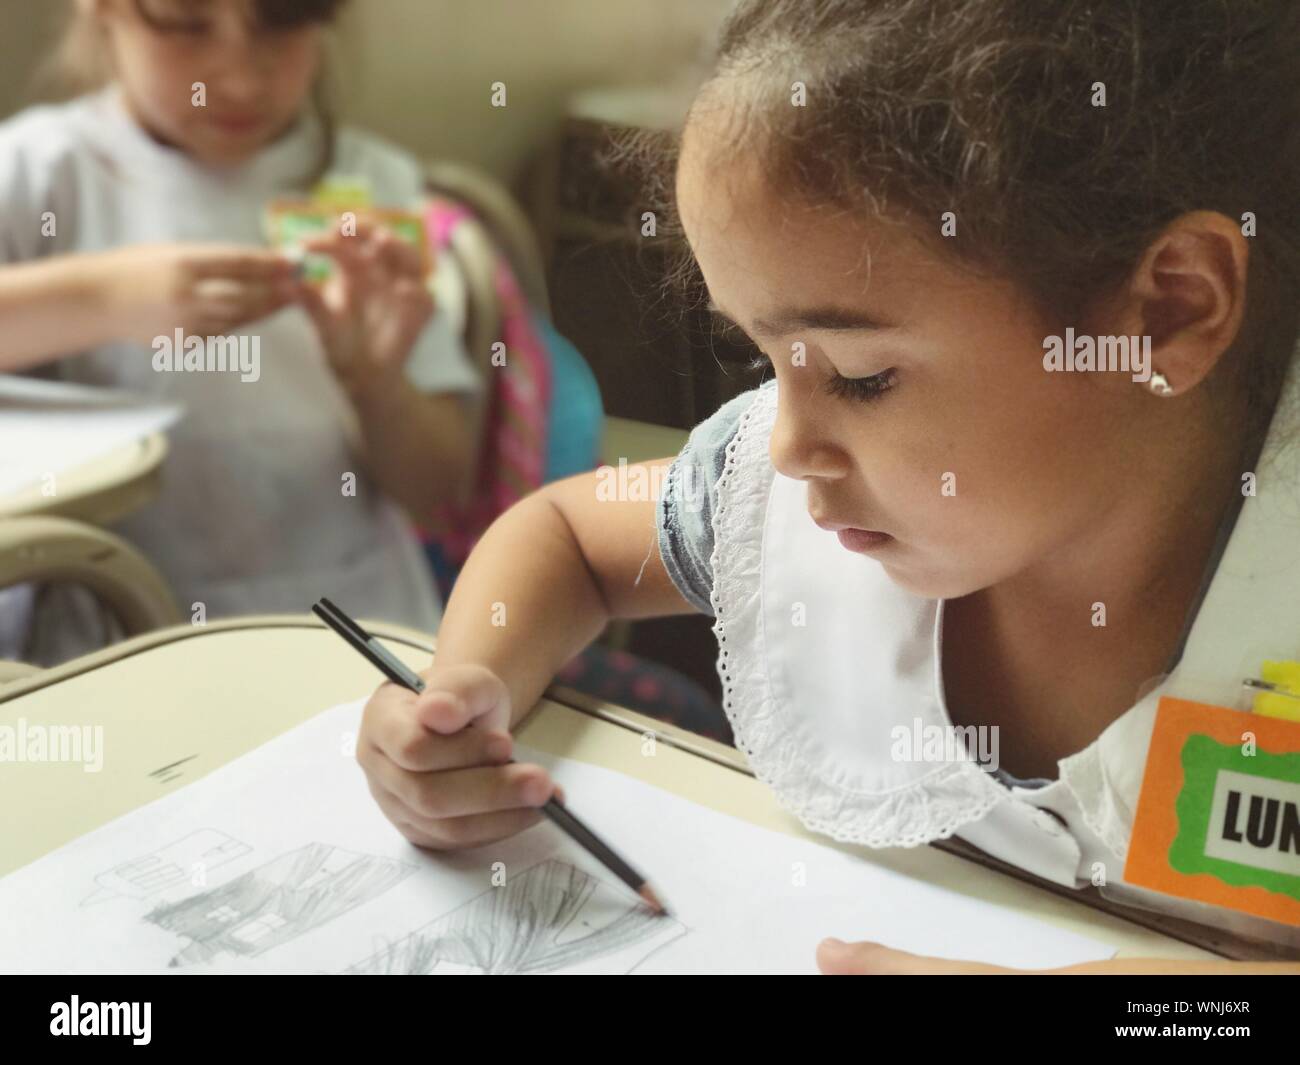 Girl With Name Tag Drawing On Paper At Desk In School Stock Photo